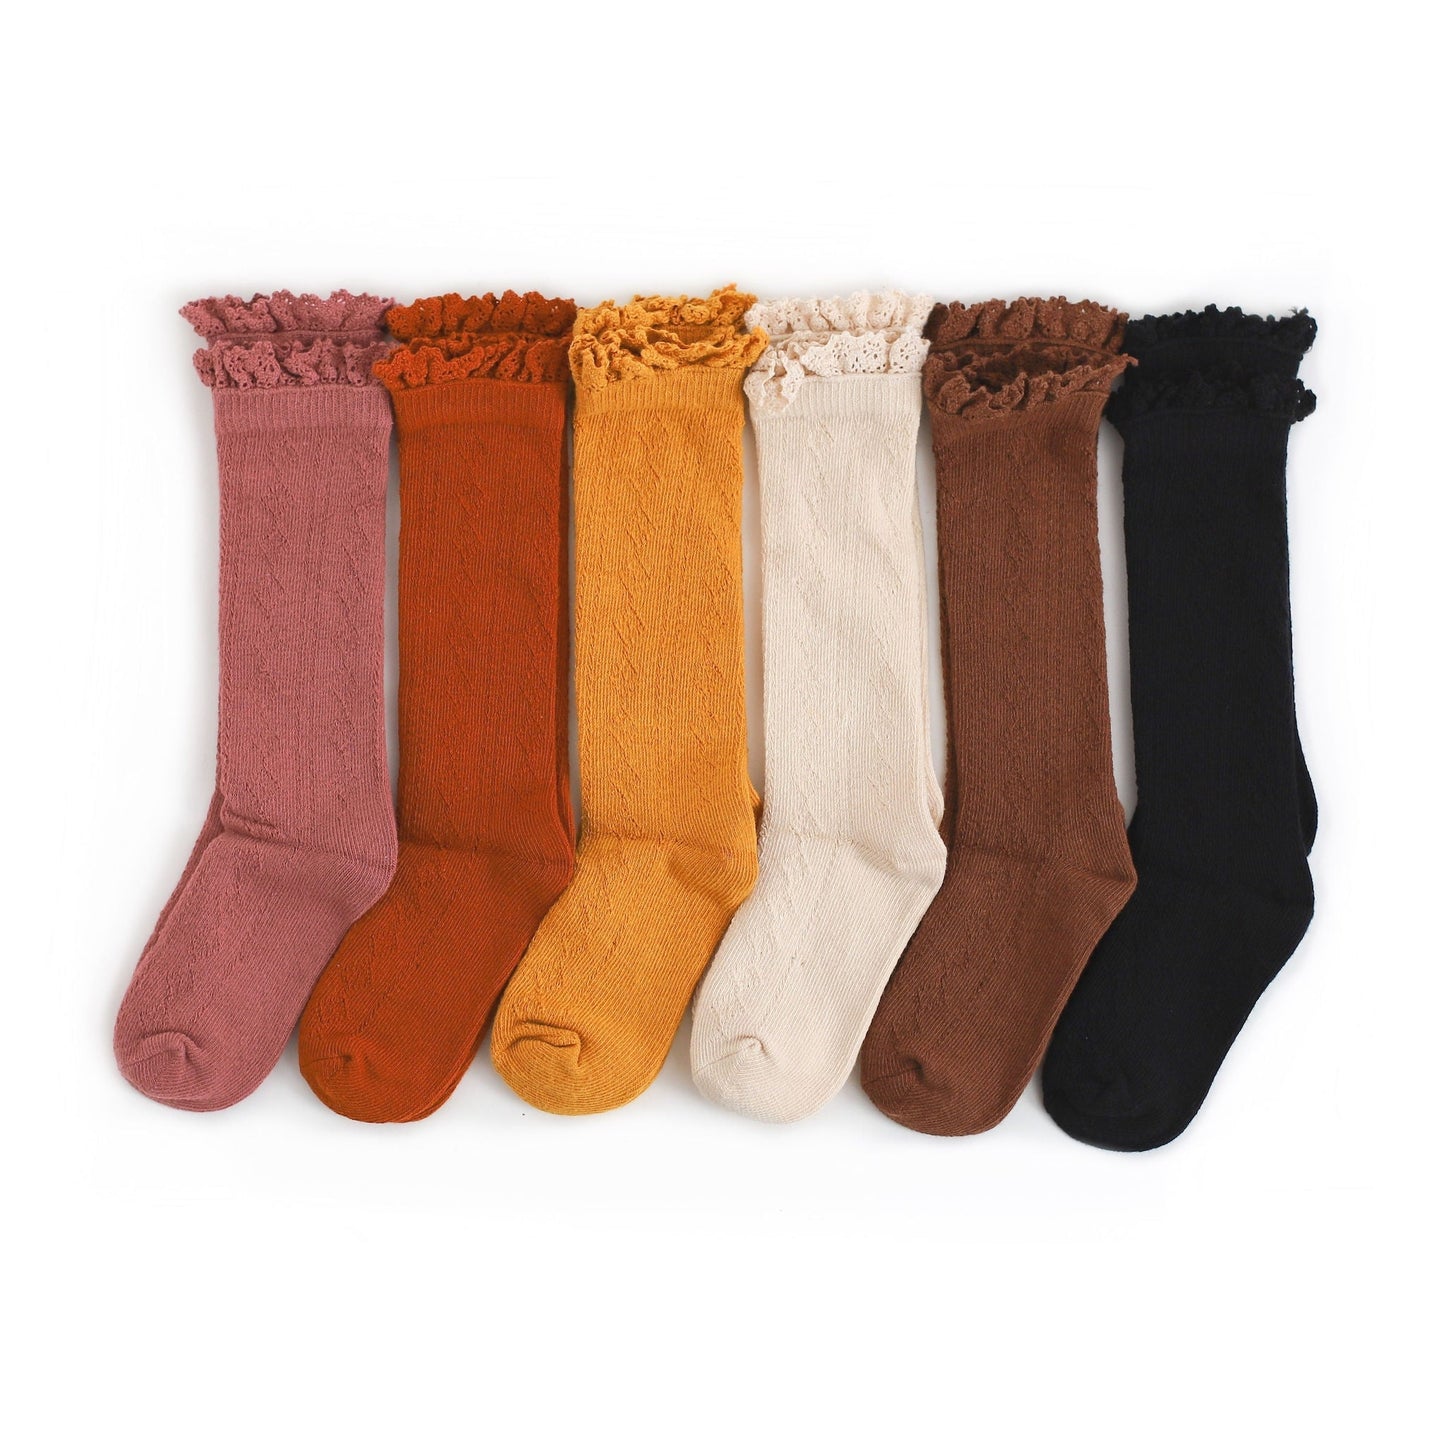 Little Stocking Co. Fall Fancy Lace Top Knee High Socks - Assorted Colors